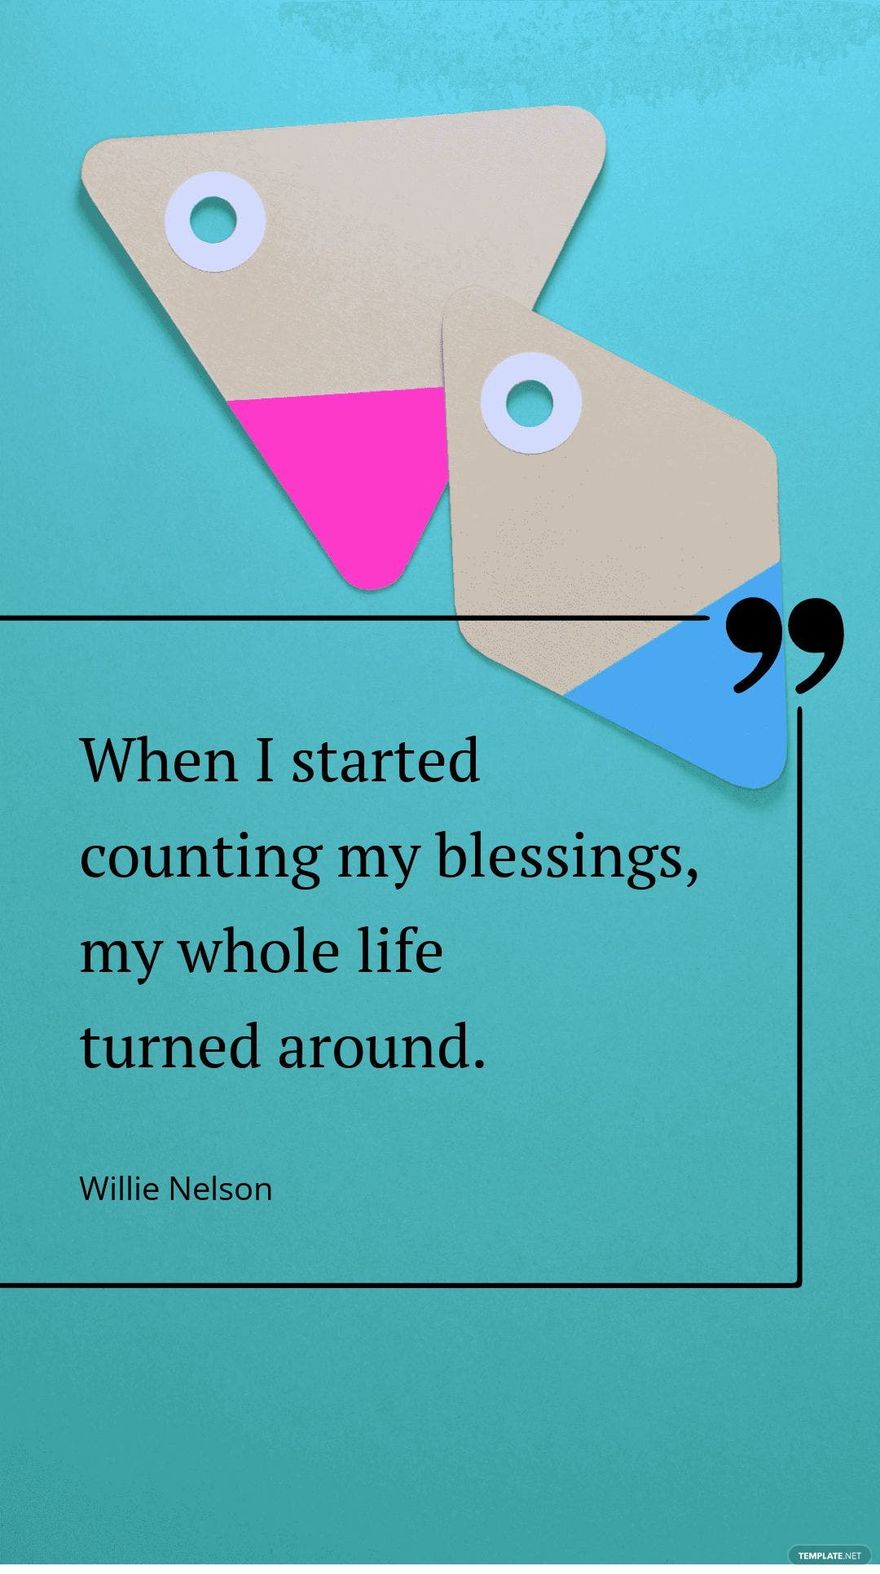 Willie Nelson - When I started counting my blessings, my whole life turned around. Template